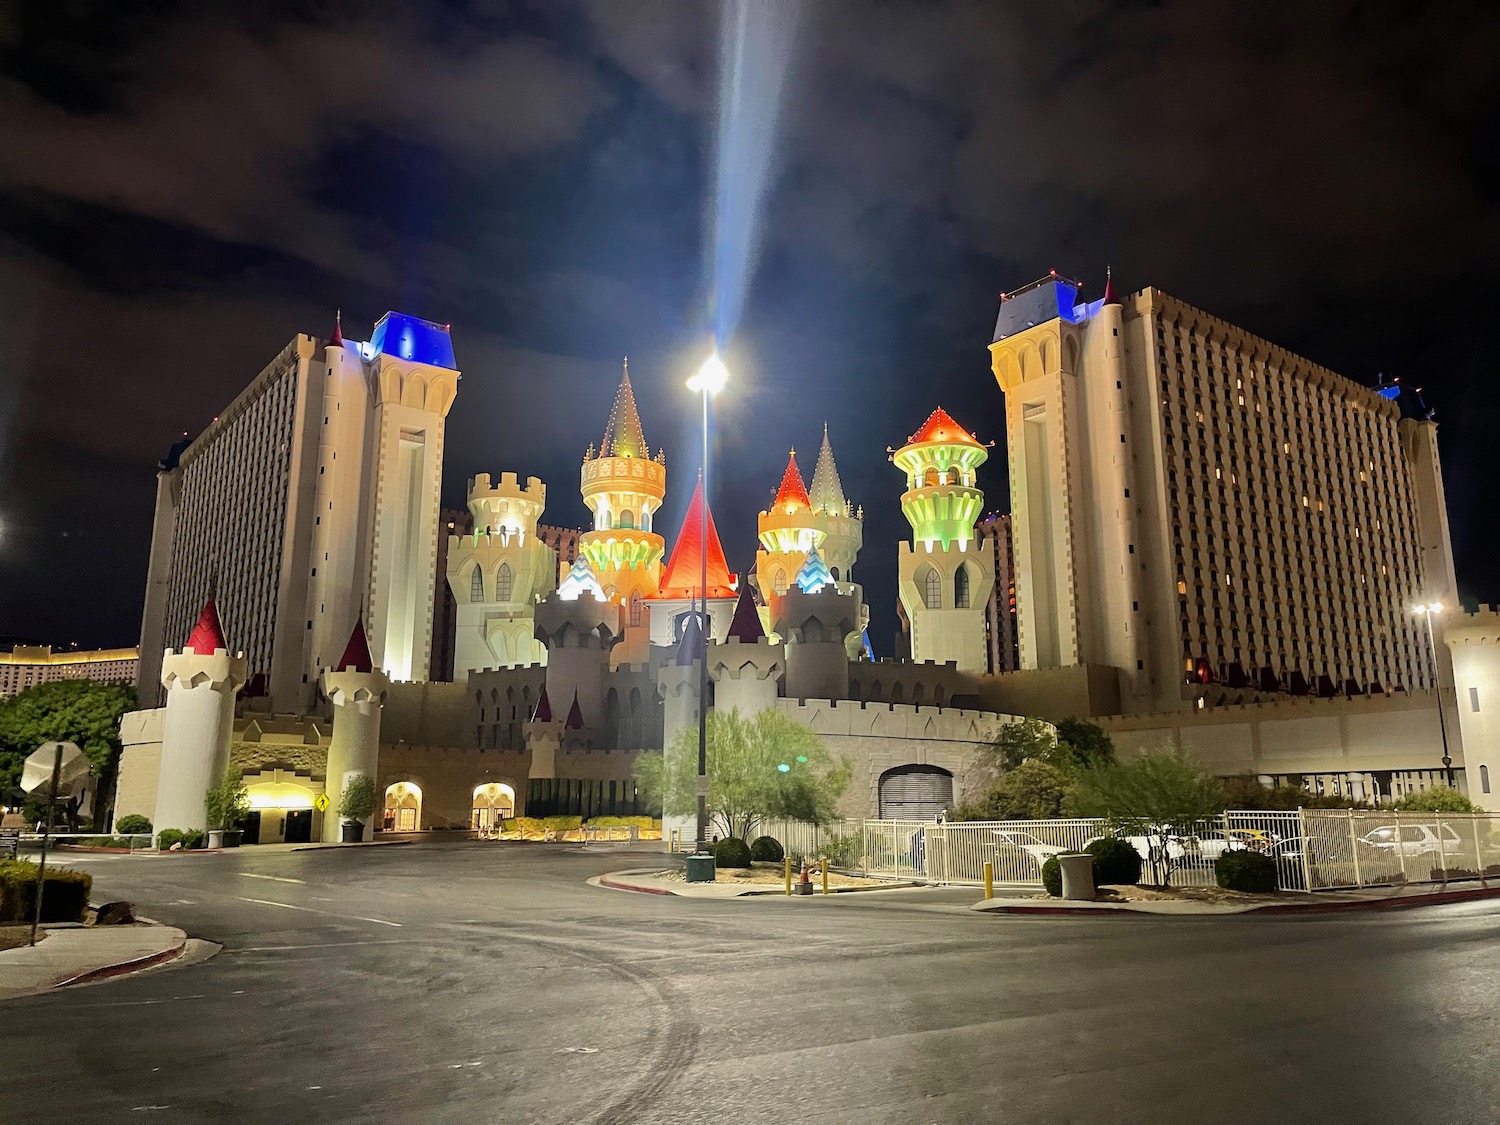 Excalibur Hotel & Casino Review: What To REALLY Expect If You Stay